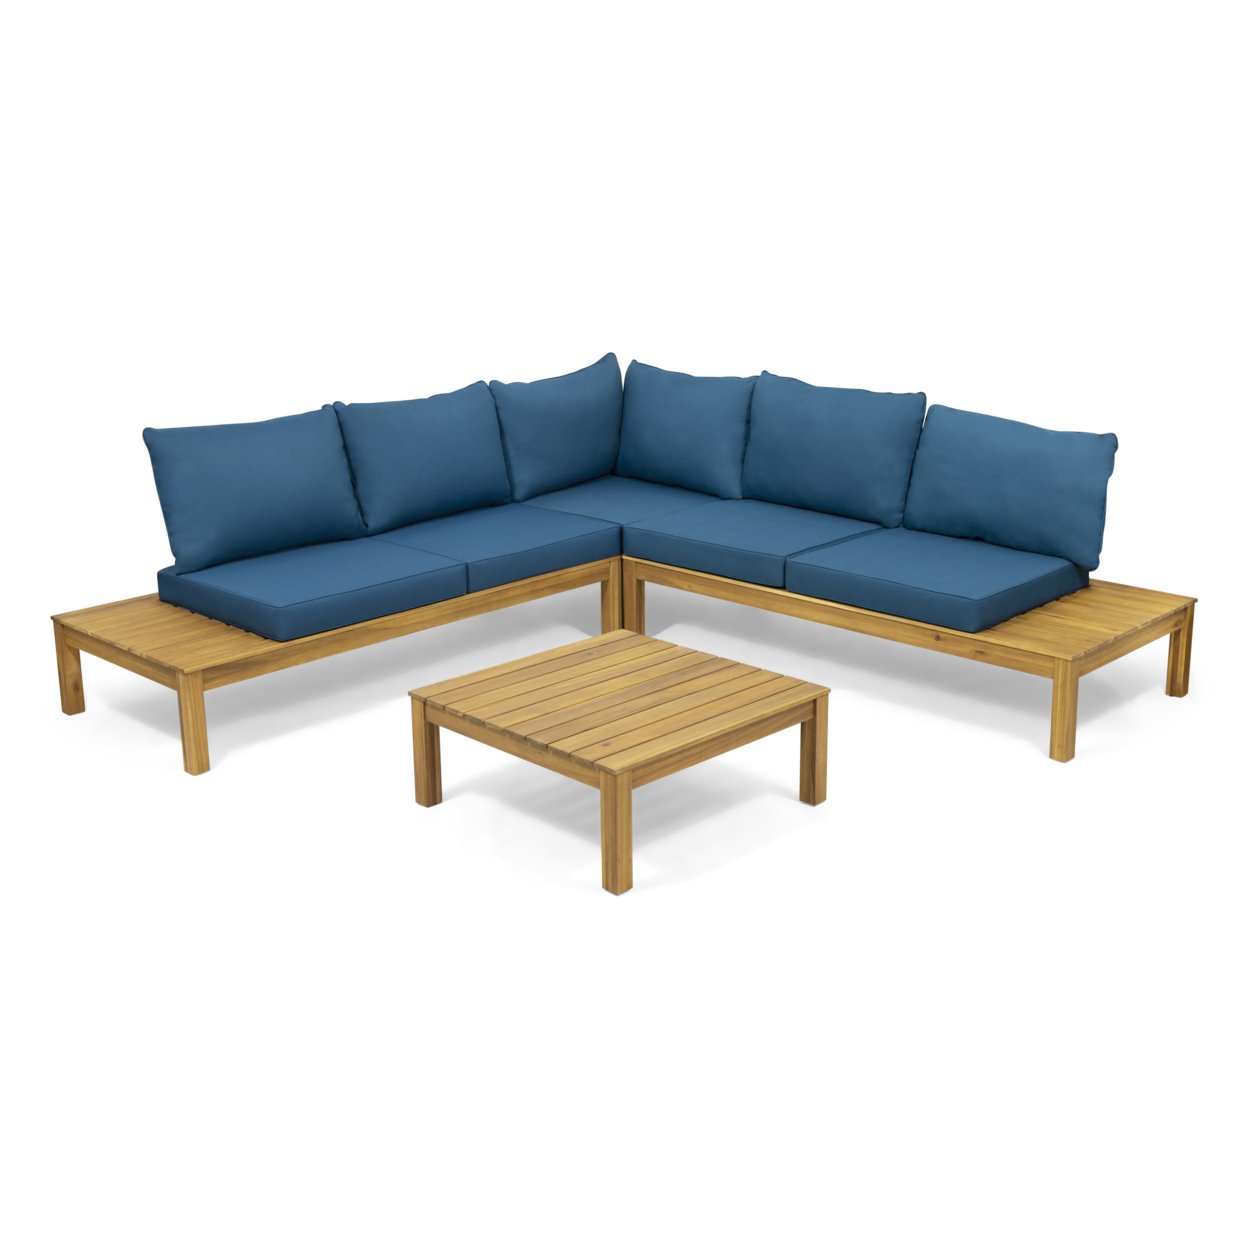 Bunny Outdoor 5 Seater V Shaped Acacia Wood Sectional Sofa Set With Cushions - Teak Finish + Dark Teal